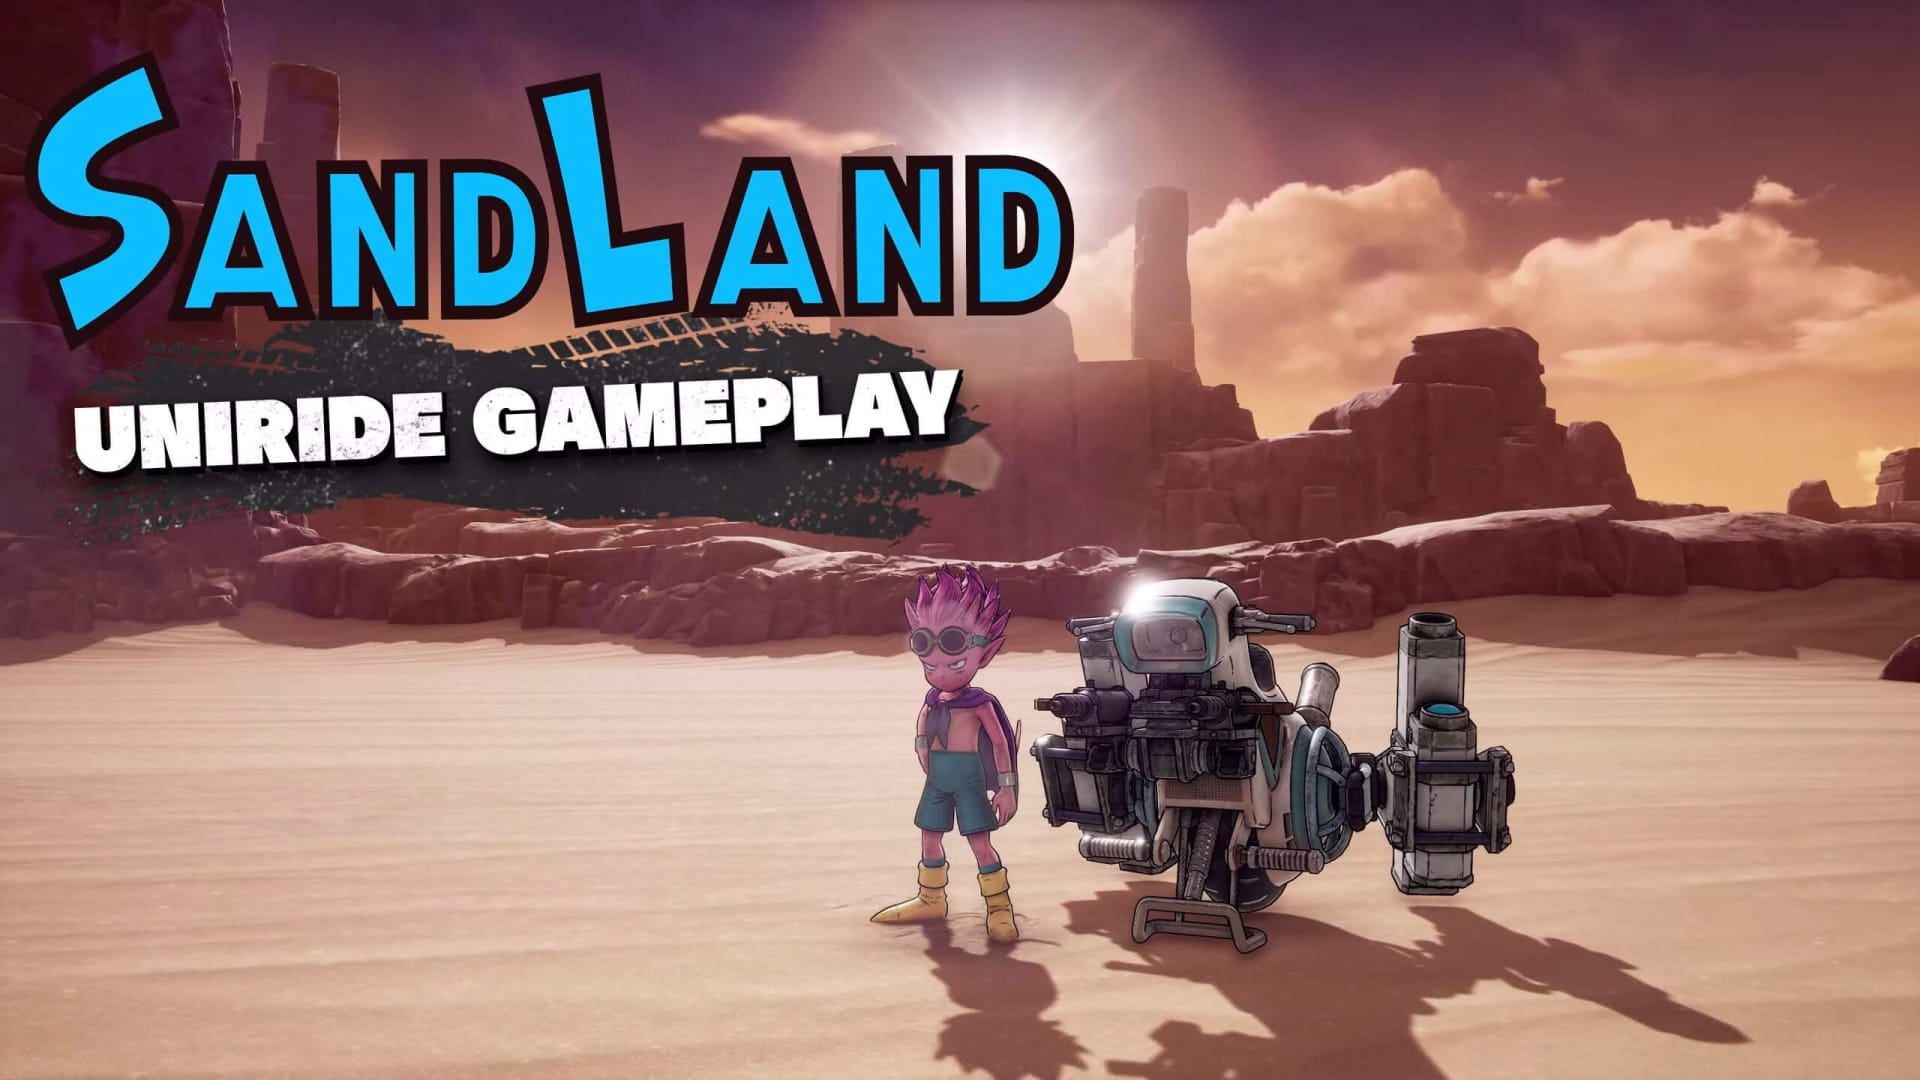 Sand Land Uniride Gameplay Trailer Shows Off Awesome Vehicular Combat